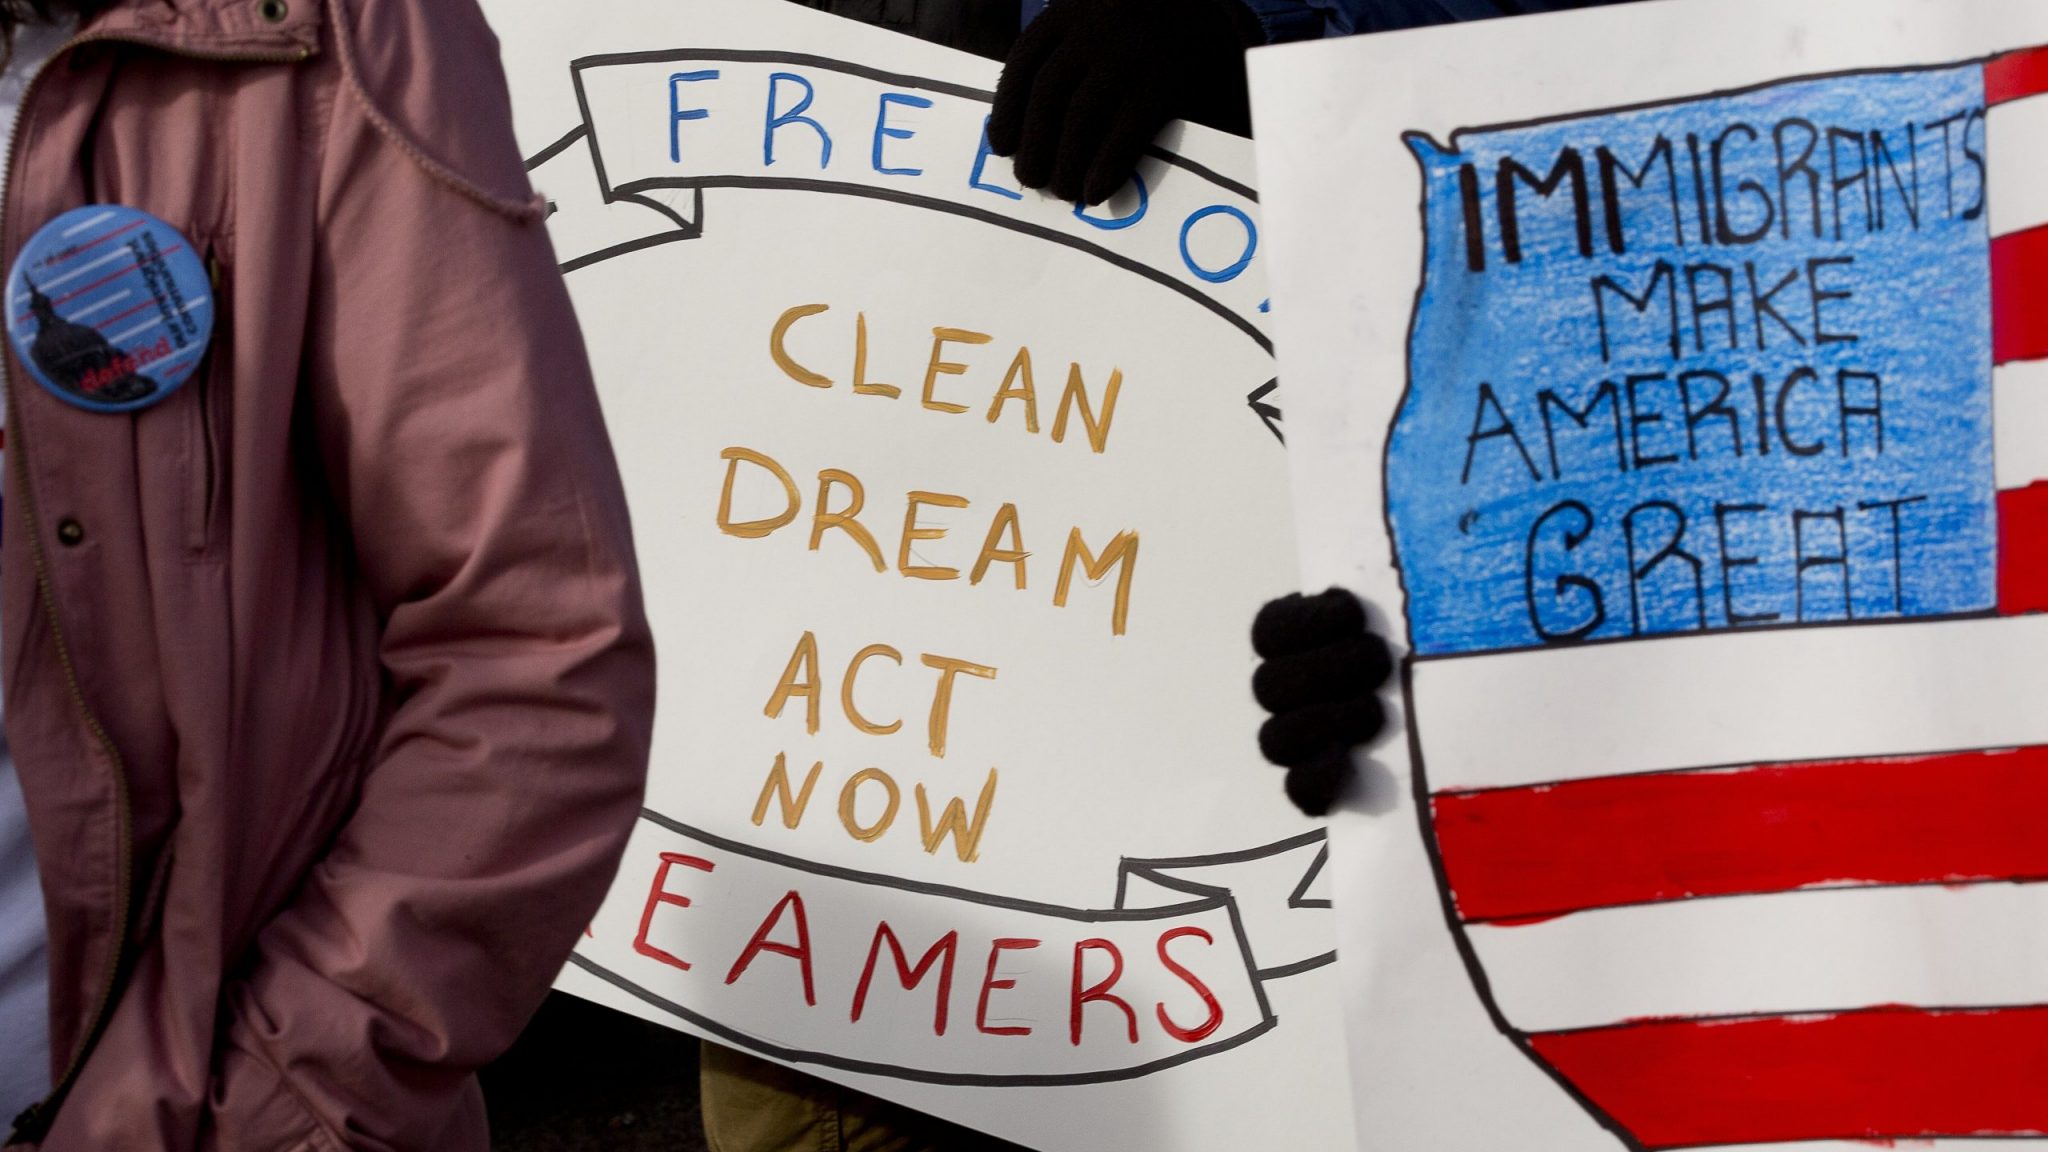 University leaders urge Senate to act quickly on newly introduced DREAM Act